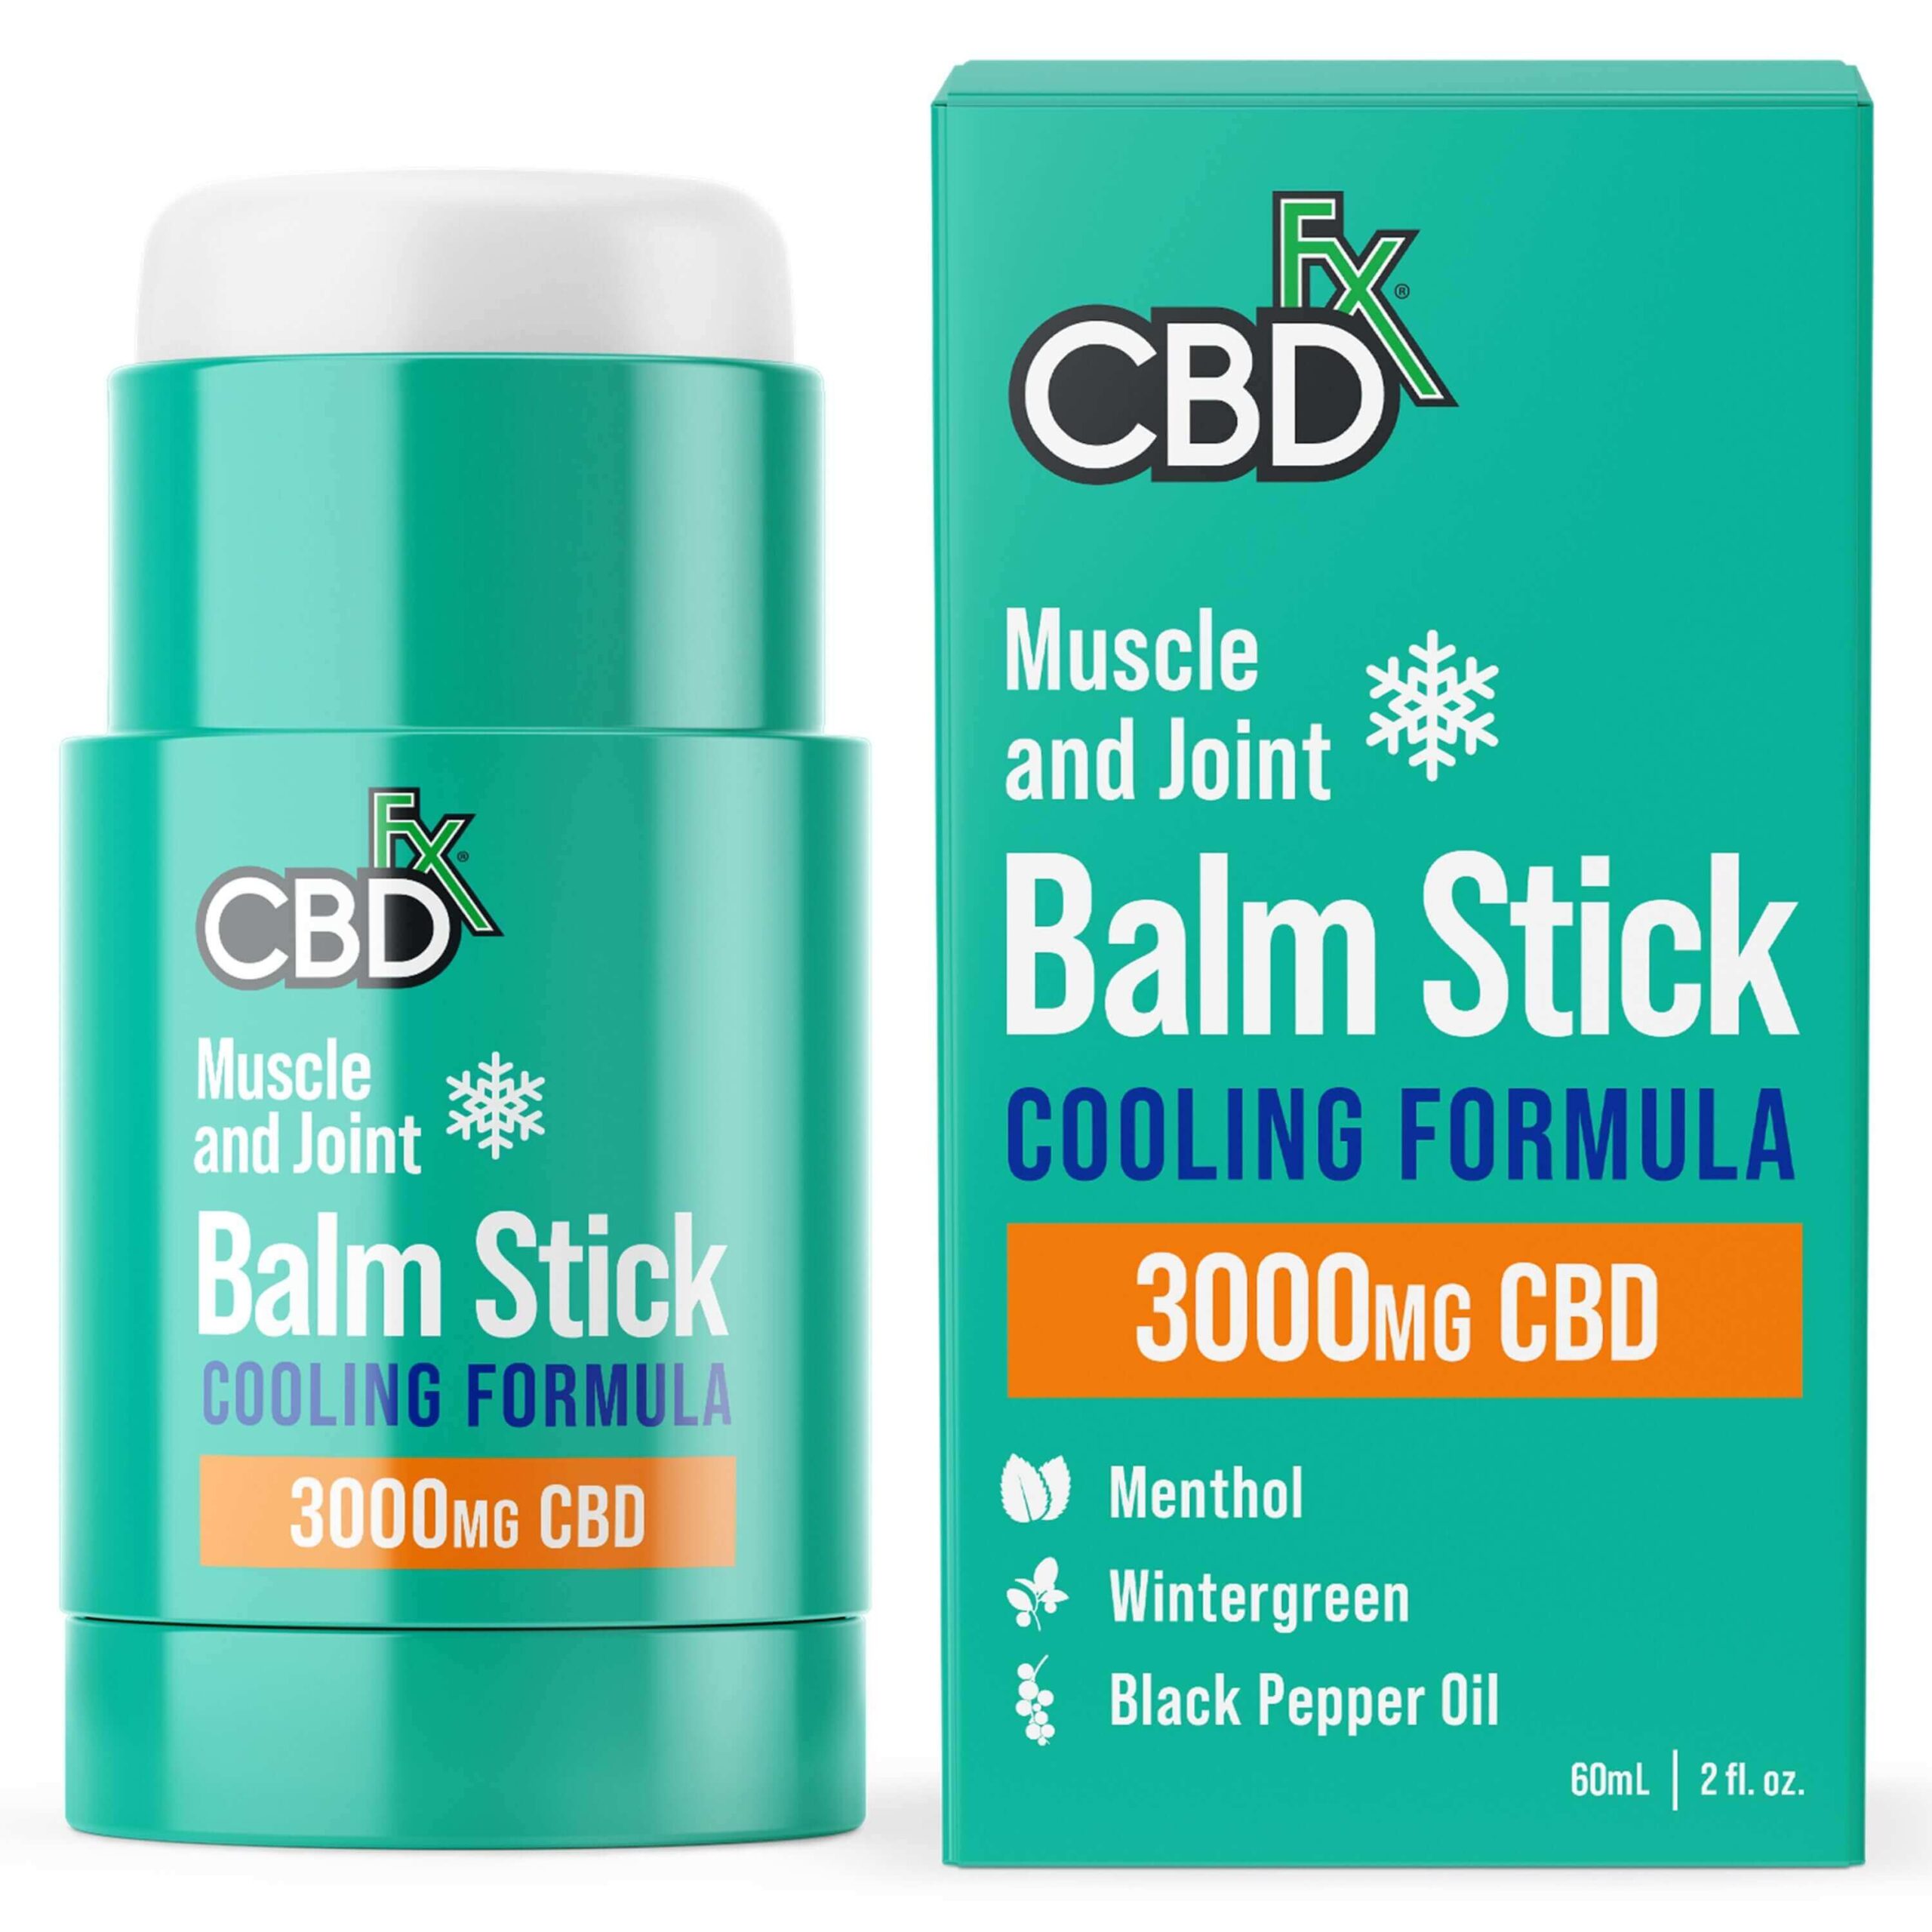 Topical category Balm Stick